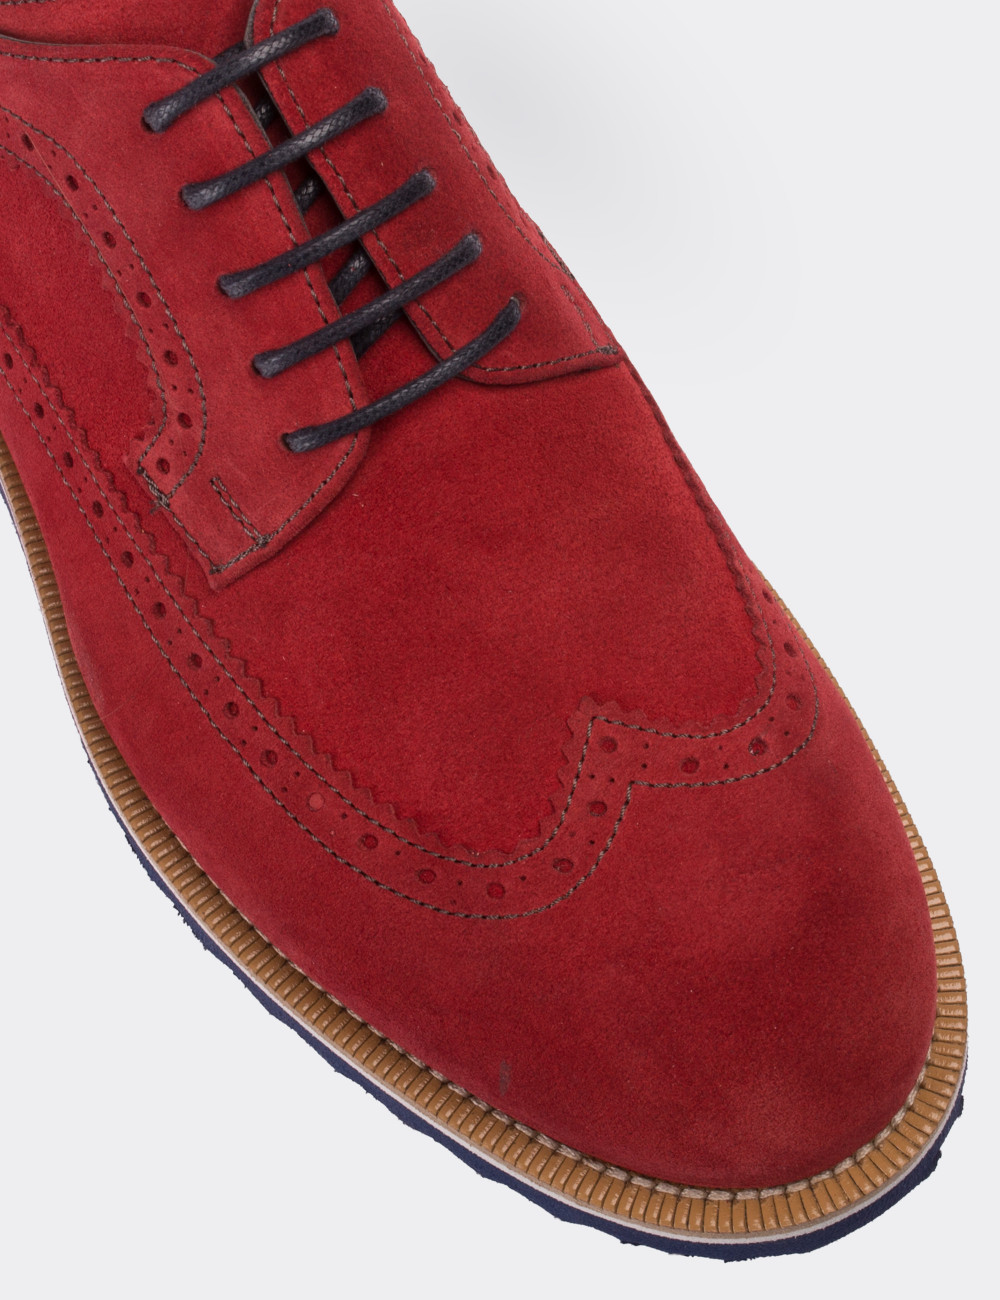 Red Suede Leather Lace-up Shoes - 01293MKRME02